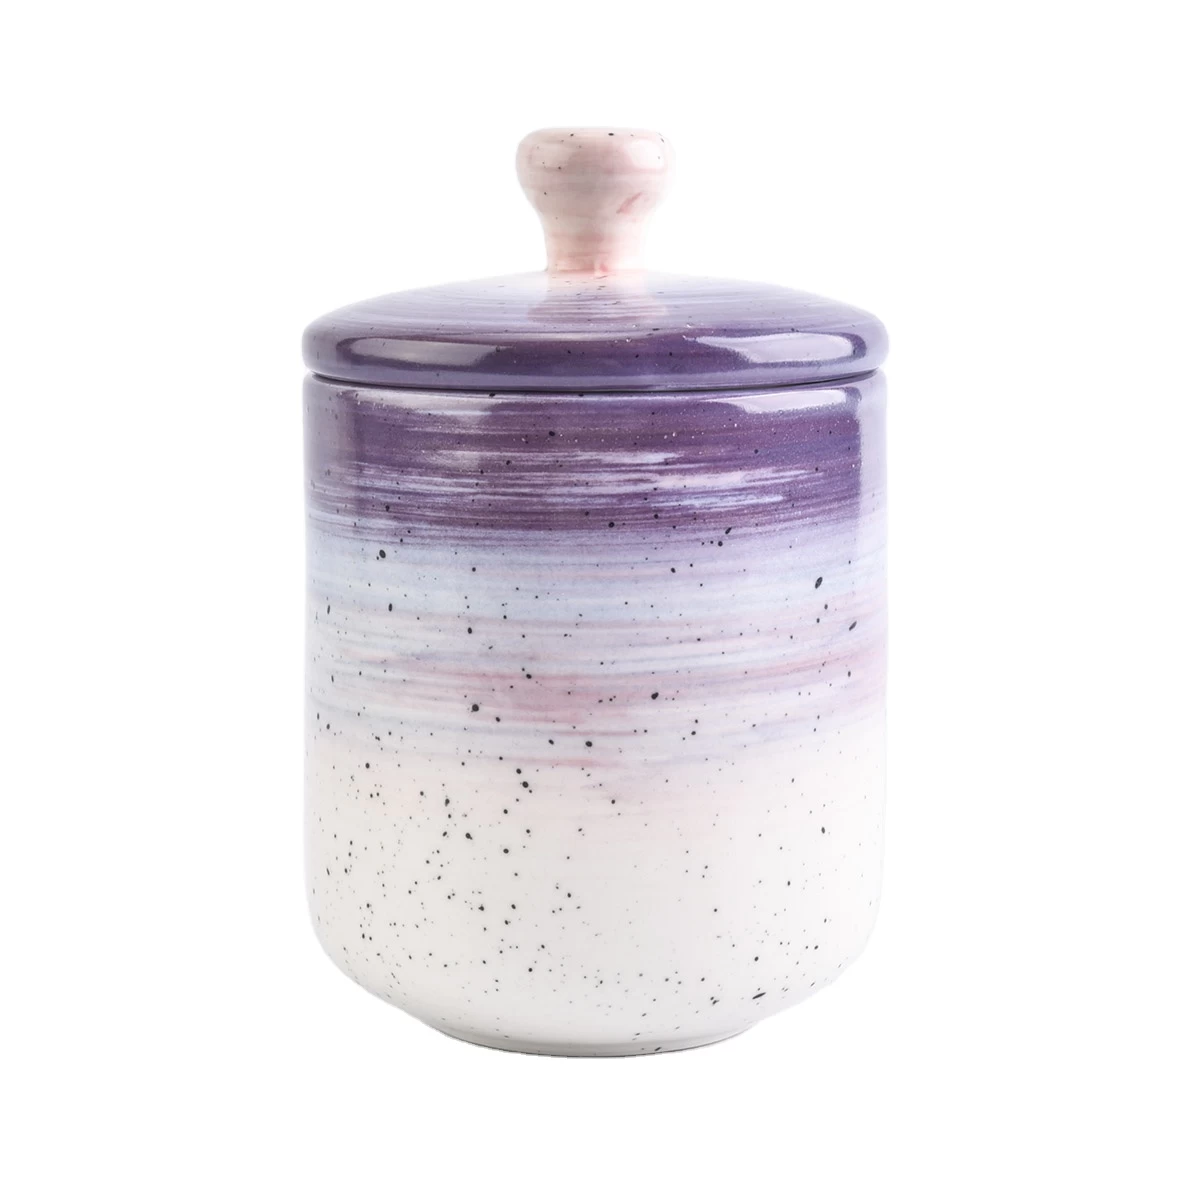 Home decoration vintage empty ceramic jars for candle making with lid